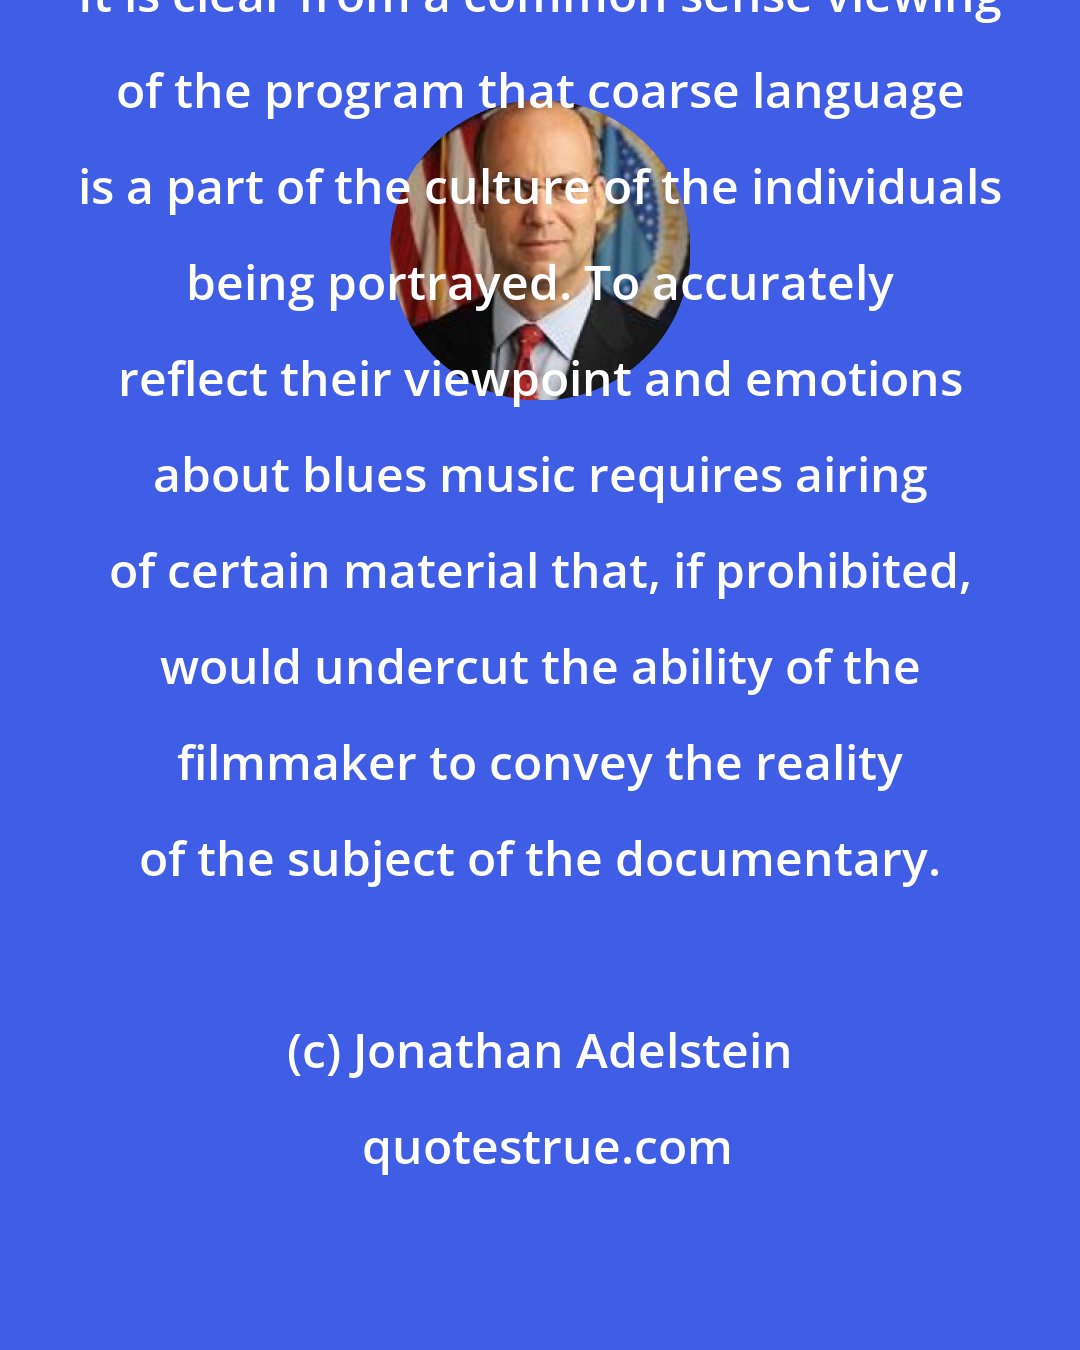 Jonathan Adelstein: It is clear from a common sense viewing of the program that coarse language is a part of the culture of the individuals being portrayed. To accurately reflect their viewpoint and emotions about blues music requires airing of certain material that, if prohibited, would undercut the ability of the filmmaker to convey the reality of the subject of the documentary.